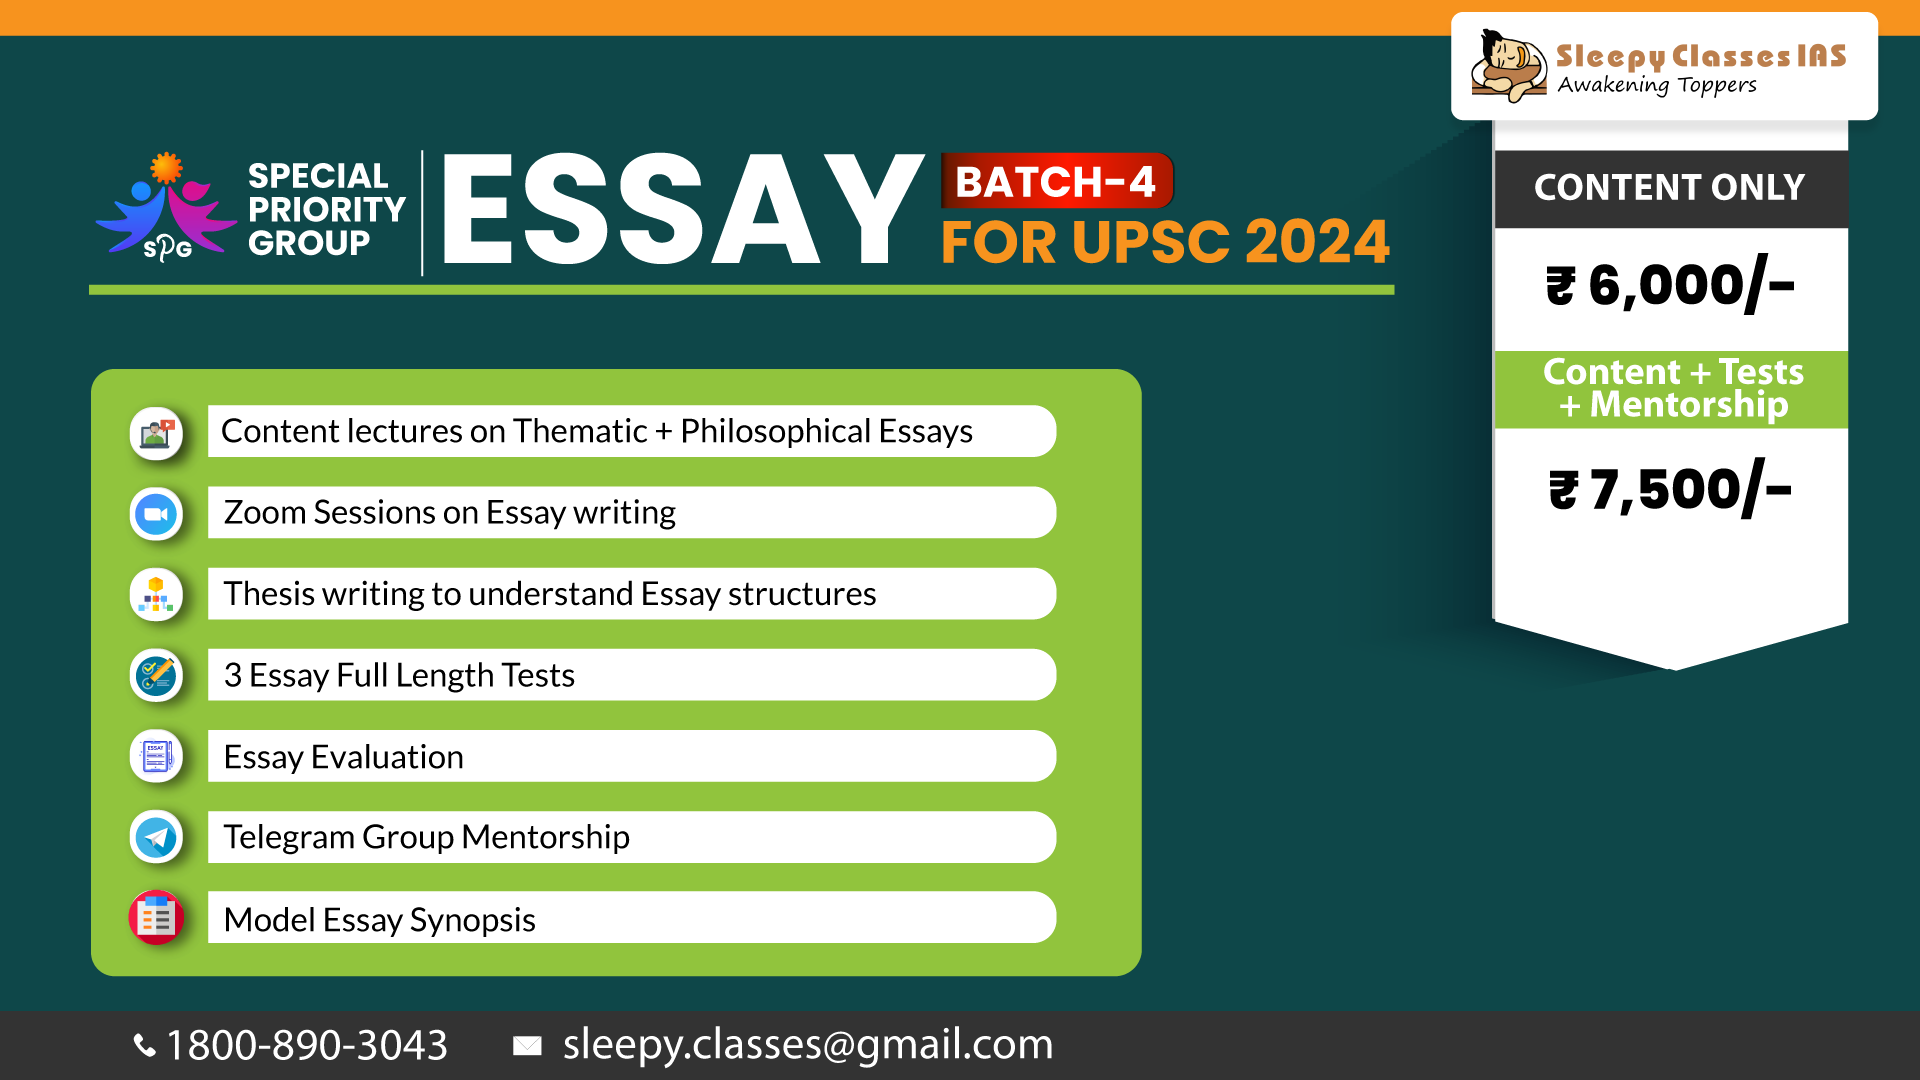 Essay batch 4 without code Essay Course for UPSC Online, essay course online, upsc essay course